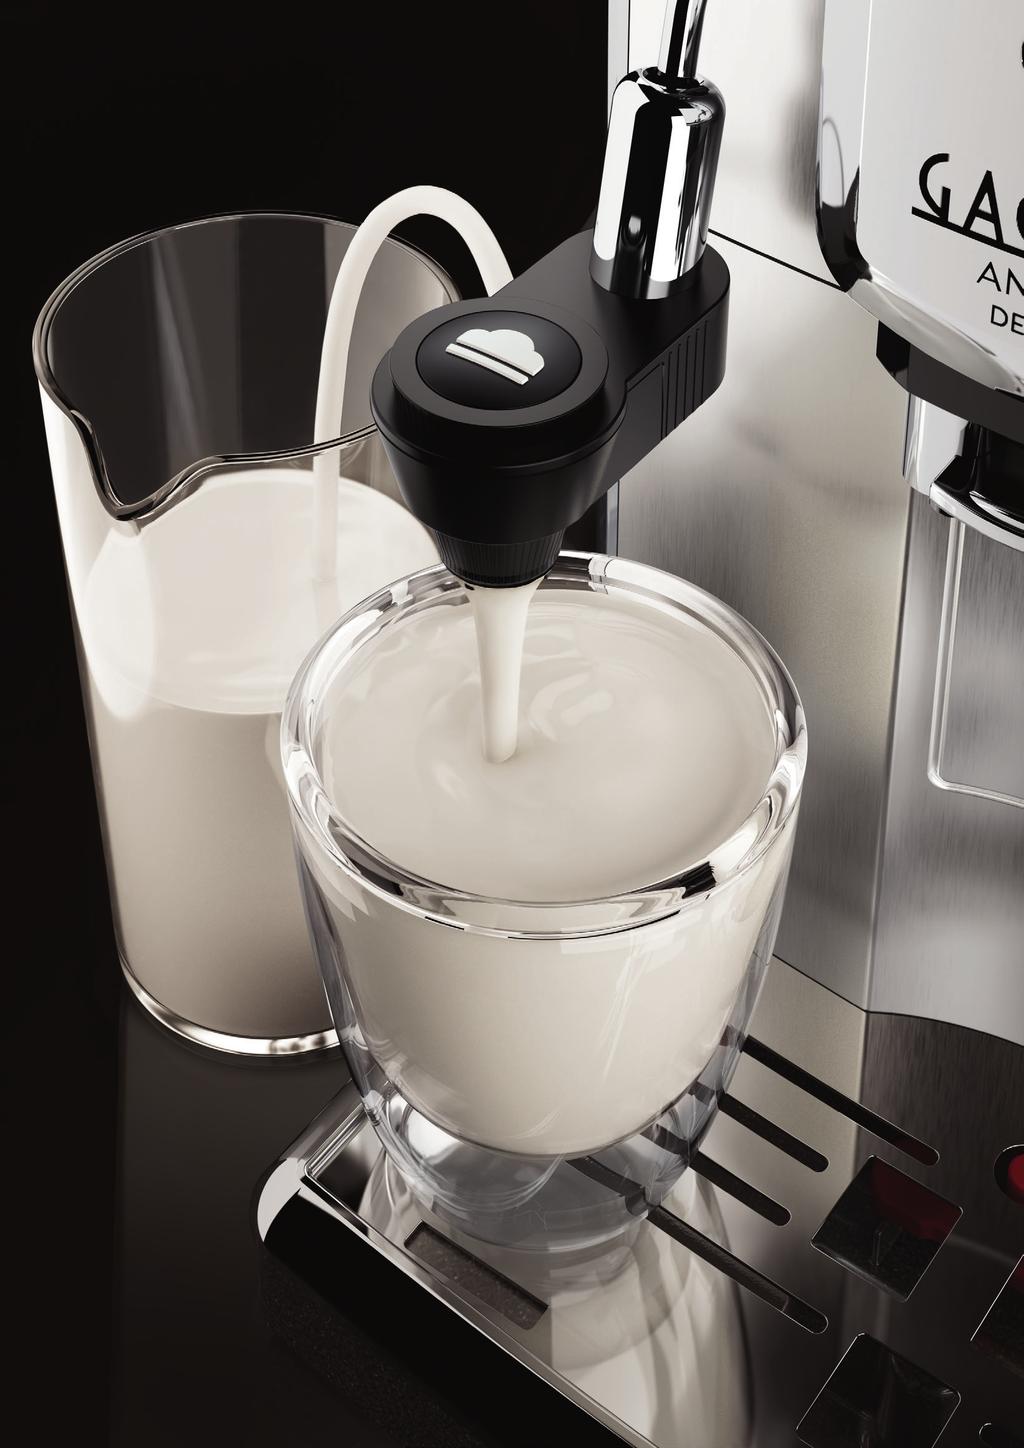 1. D E TA I L S 1- Automatic milk frother 2-